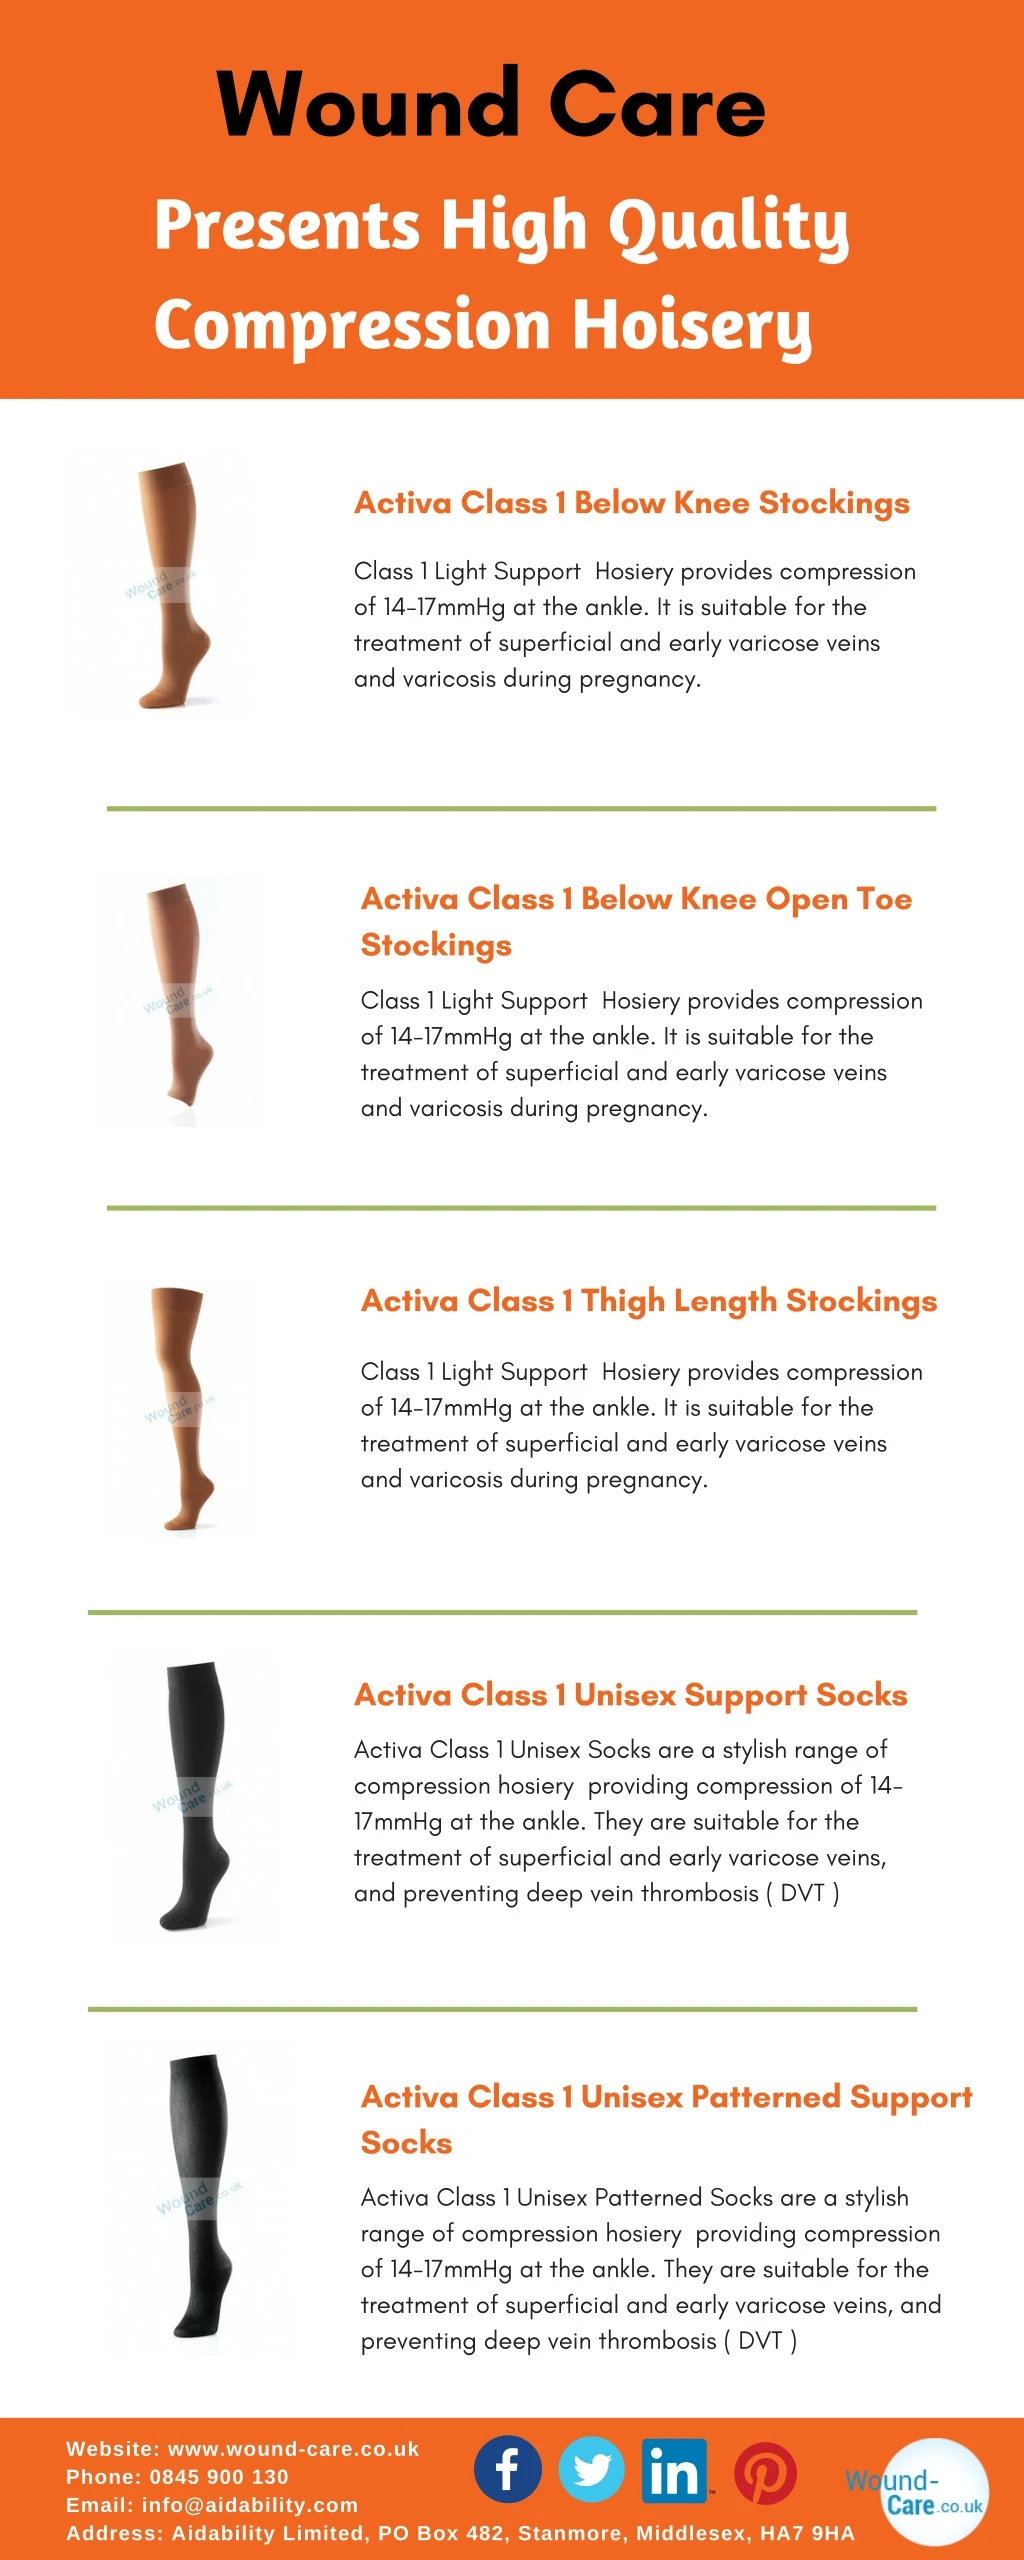 wound care presents high quality compression